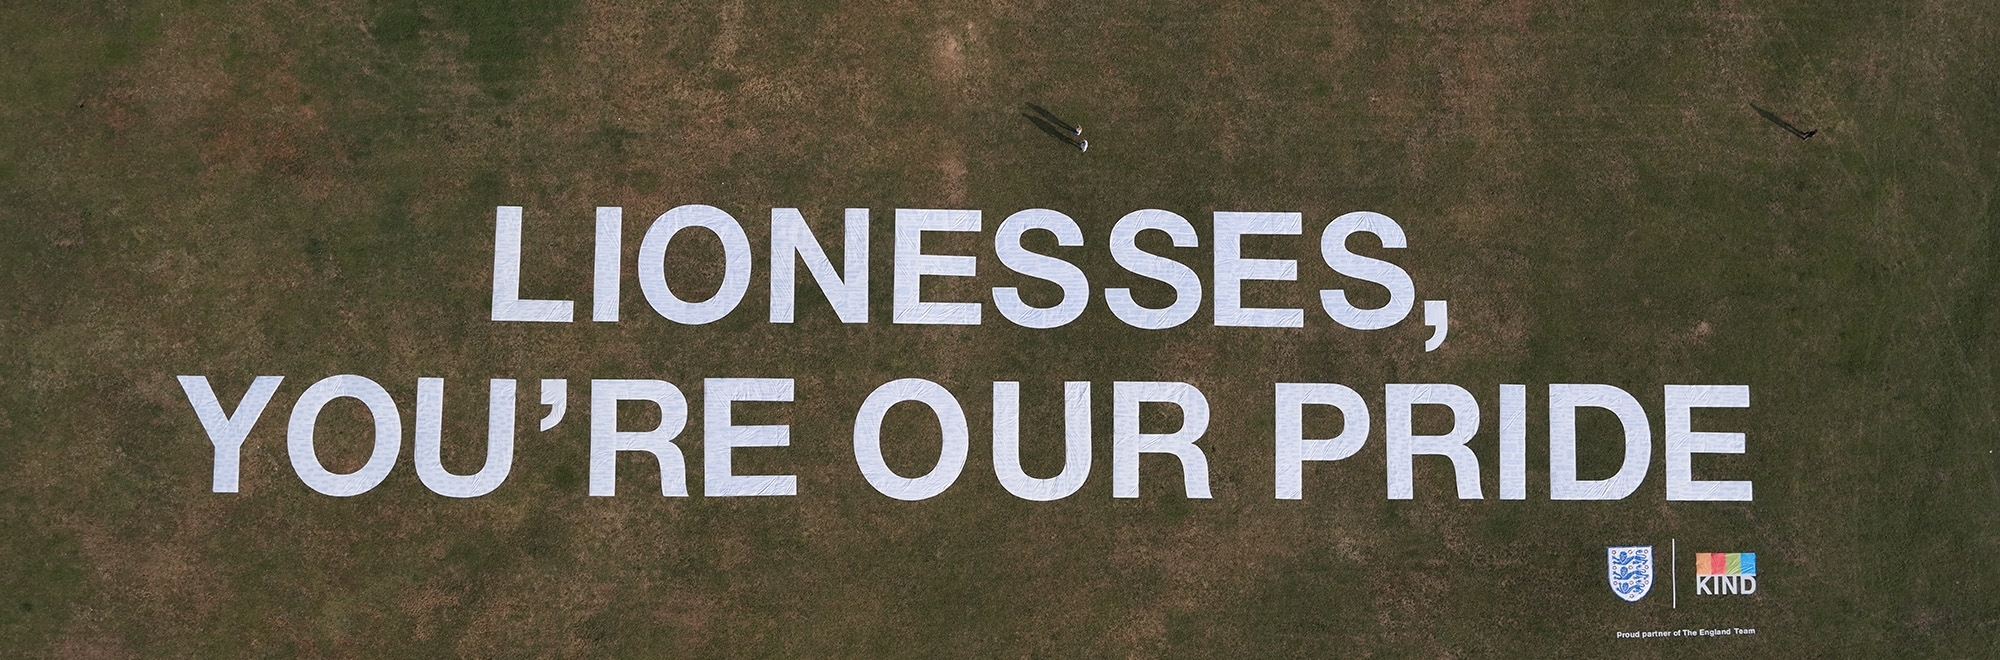 Kind Snacks reveals 100 metre wide good luck message for lionesses as they fly down under